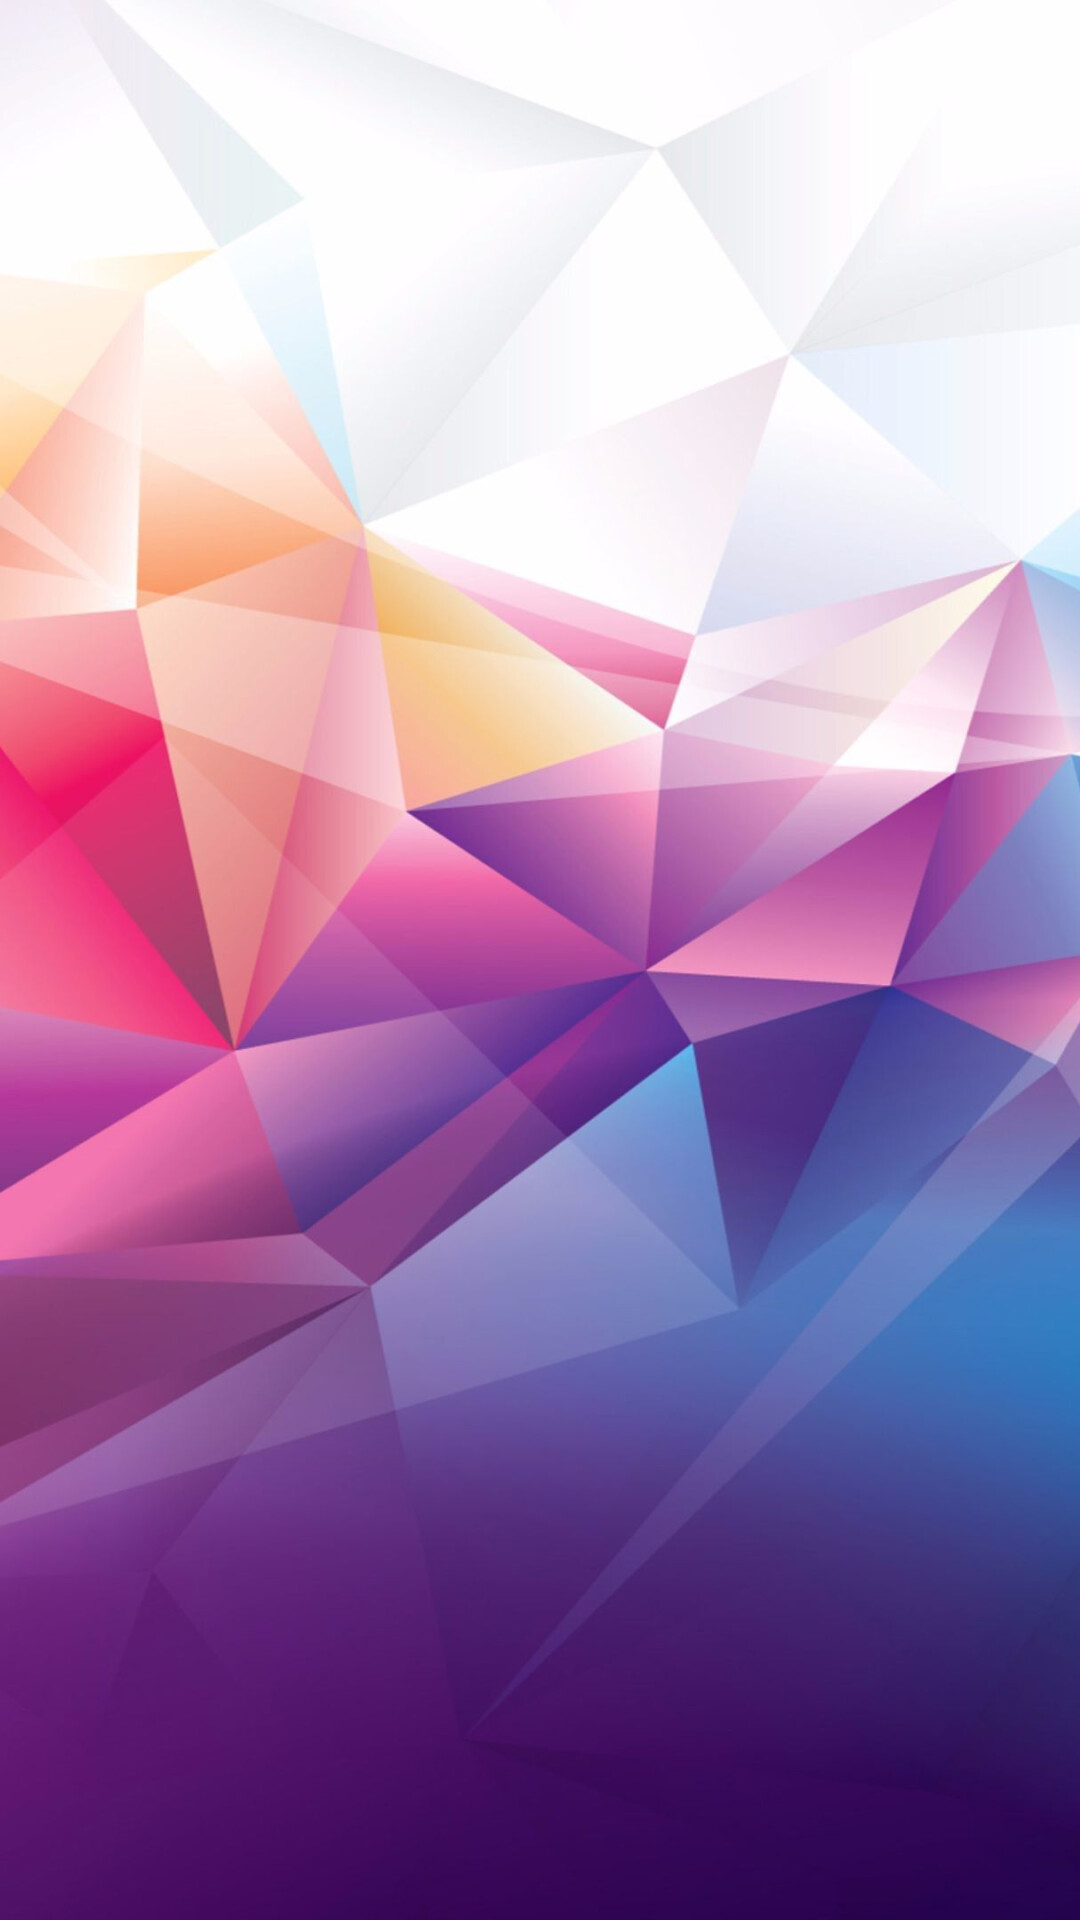 Geometric Abstract: Polygonal figures, Triangles, Intersecting lines. 1080x1920 Full HD Background.